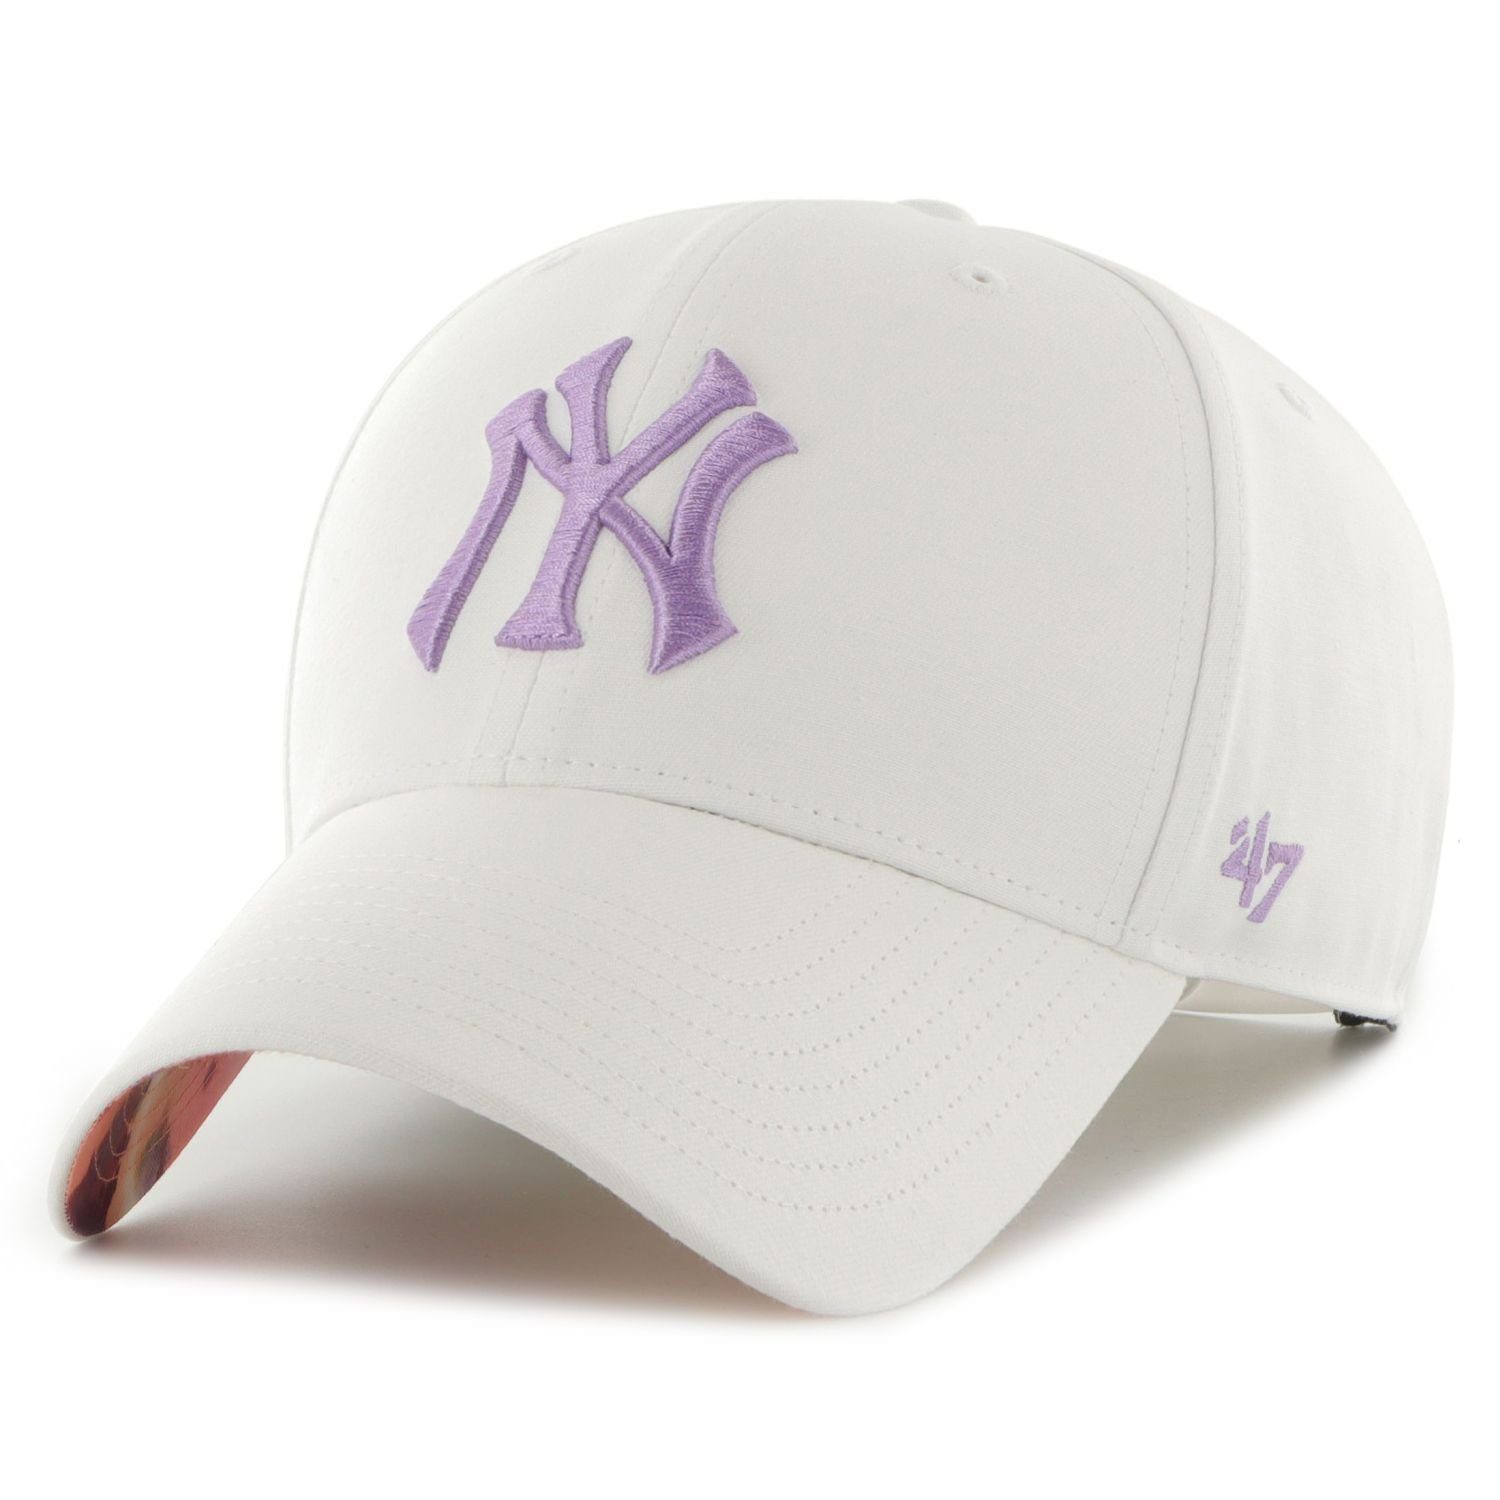 DAY Brand Fit Cap GLOW New Baseball Yankees York '47 Relaxed